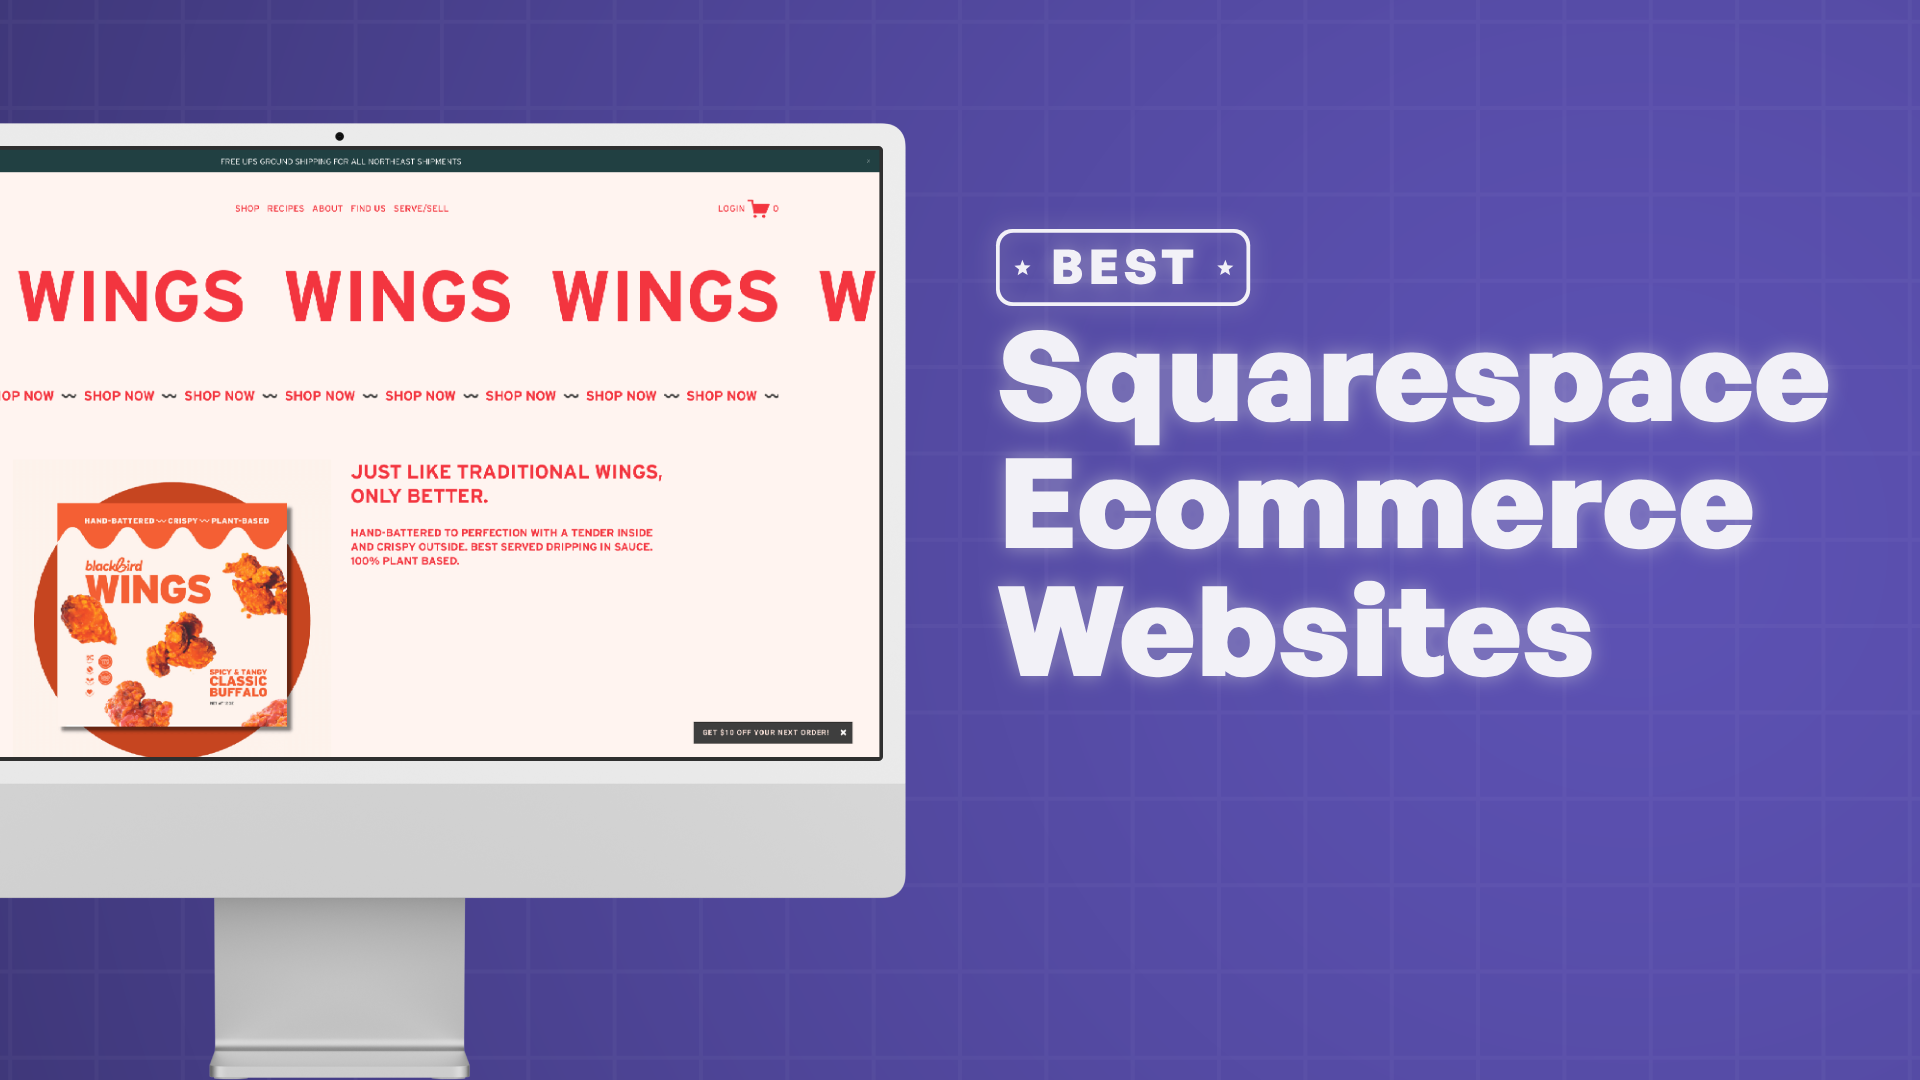 "Best Ecommerce Websites on Squarespace" with screenshots of the ecommerce websites on Squarespace